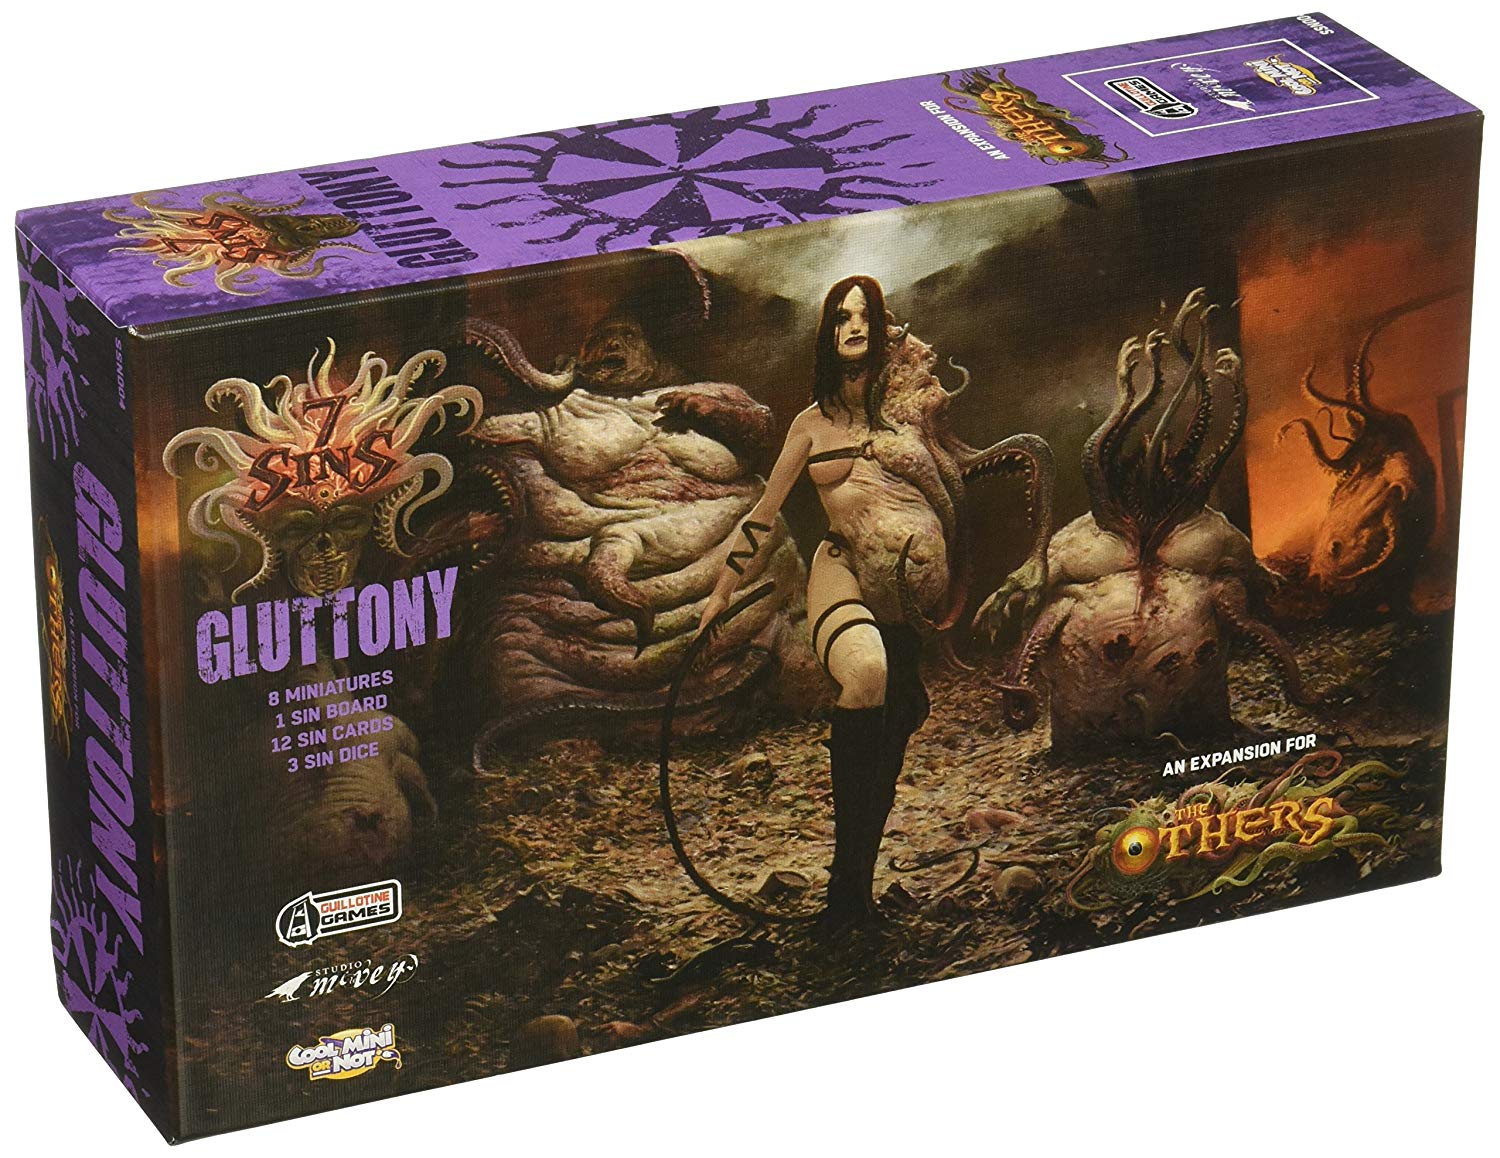 Cool Mini or Not The Others Gluttony Box Board Game